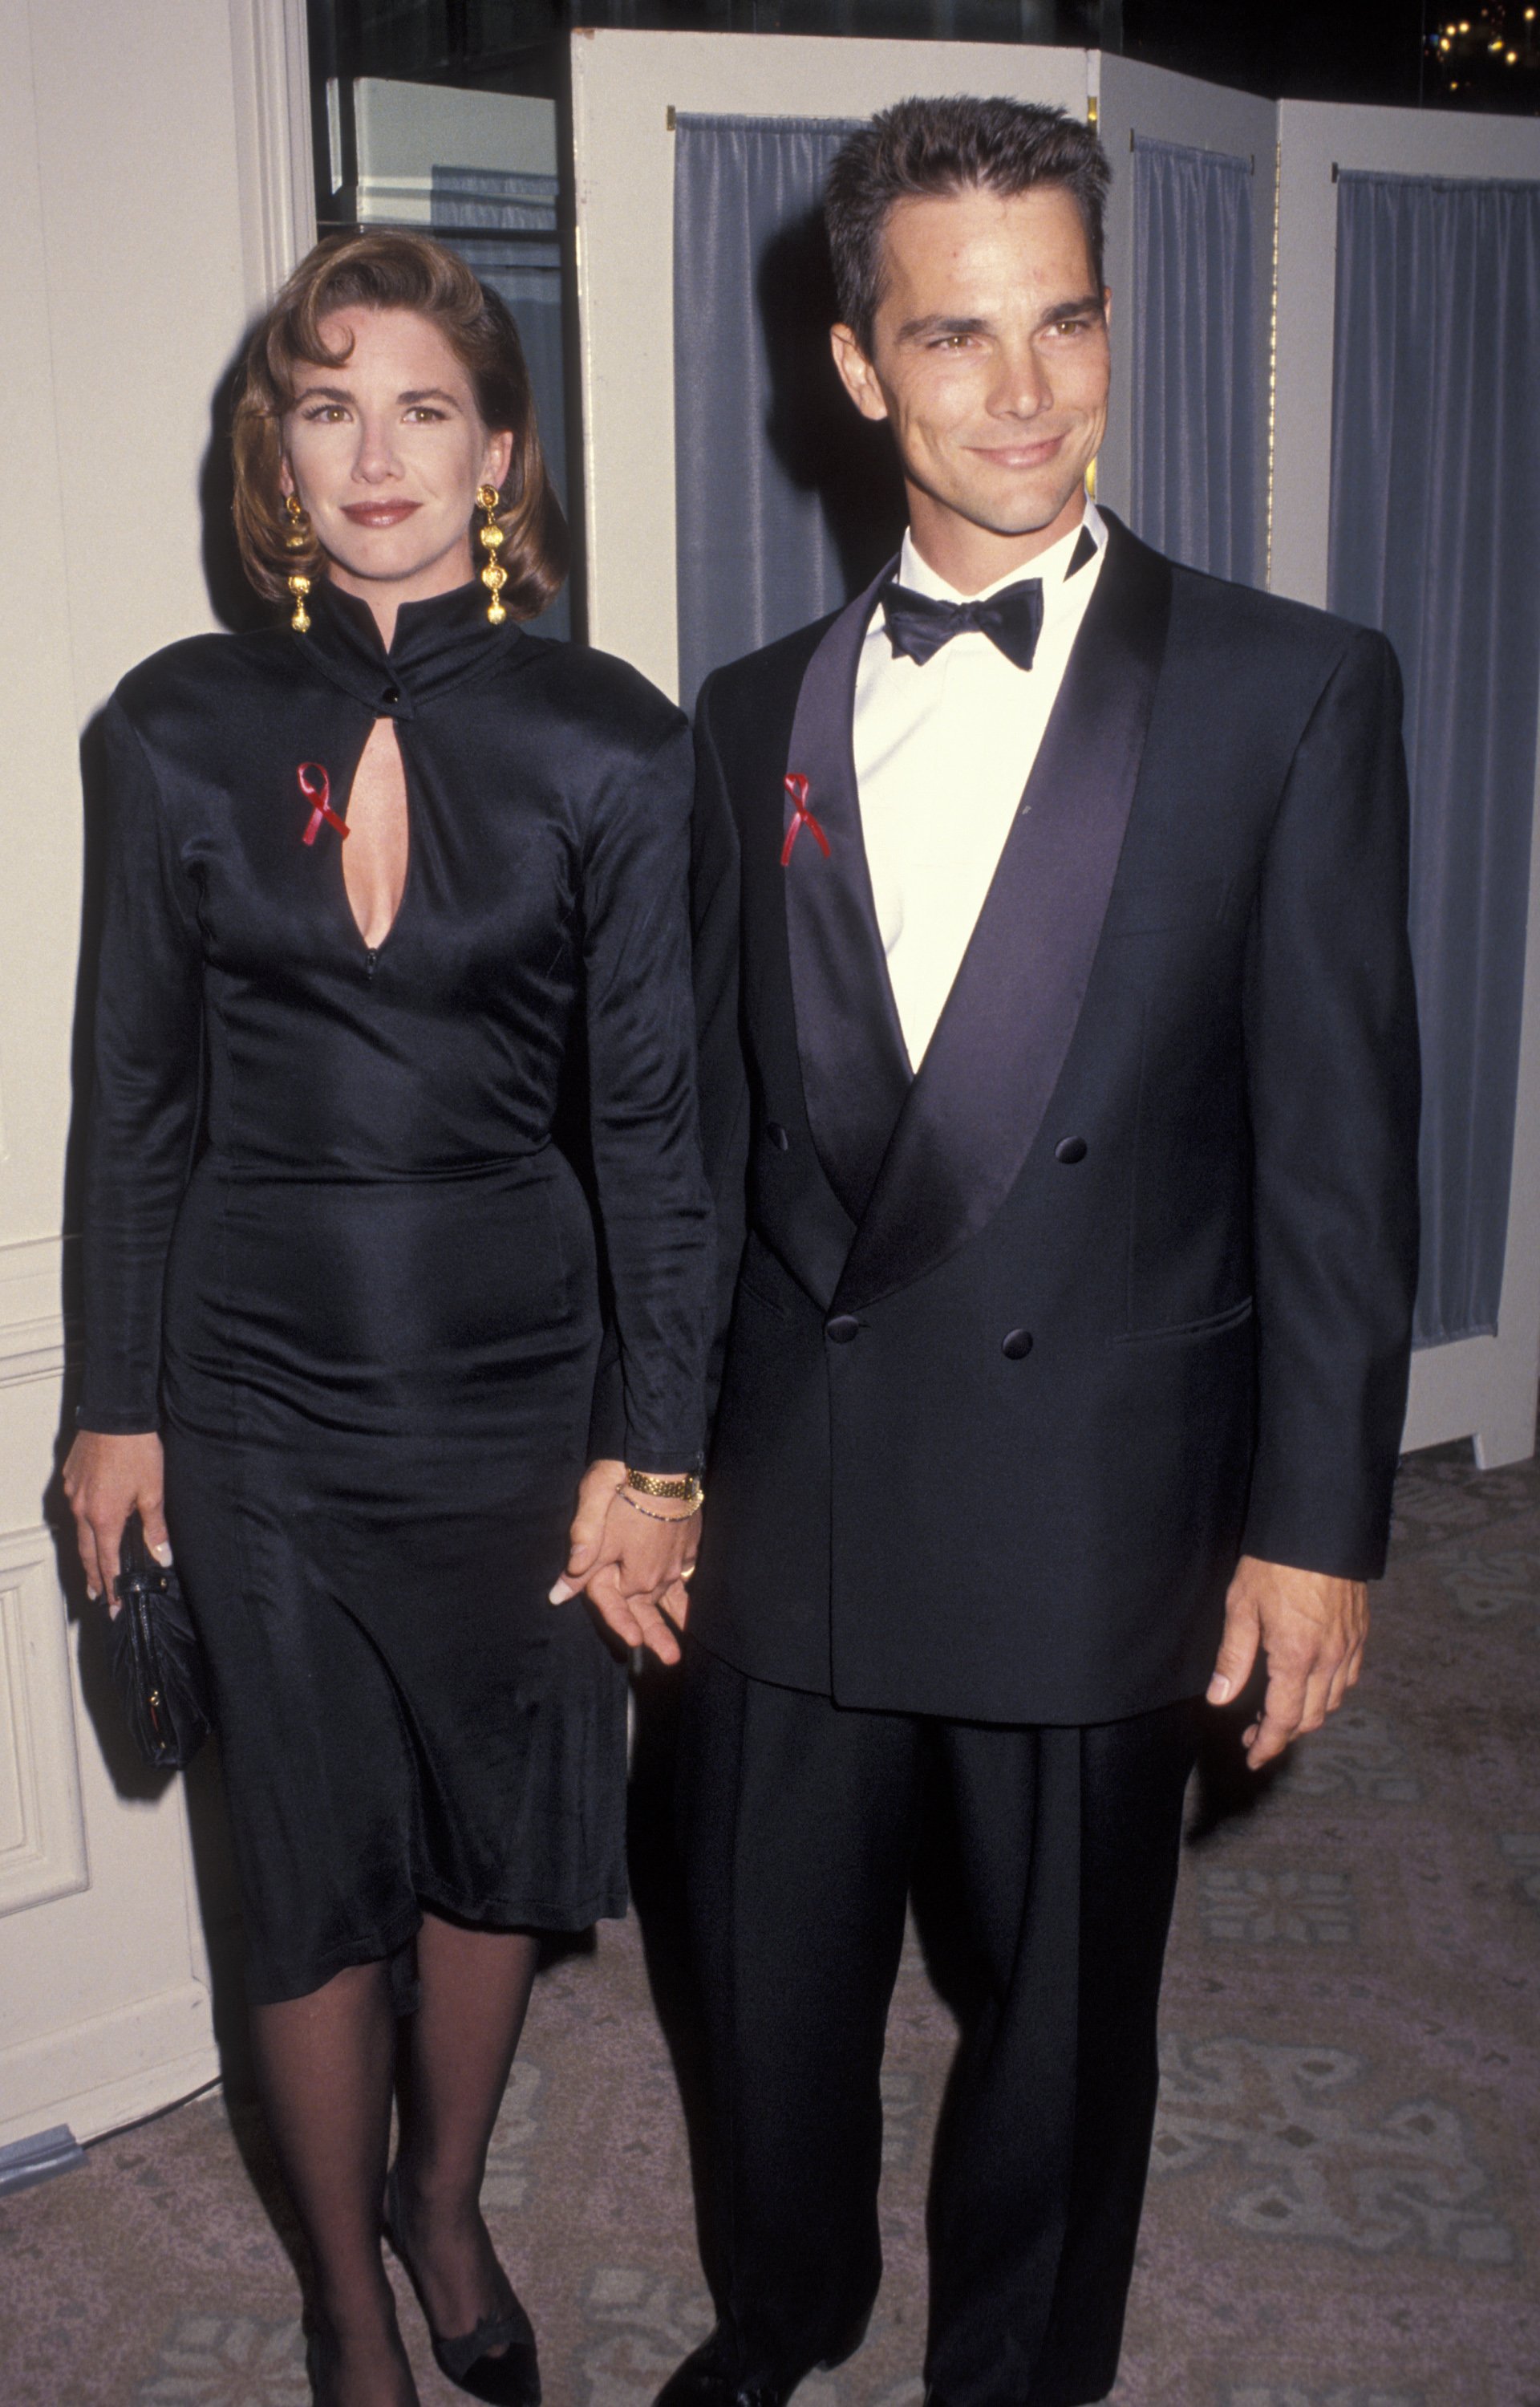 Bo Brinkman and Melissa Gilbert at the 22nd Annual Nostros Awards June 05, 1992 | Source: Getty Images